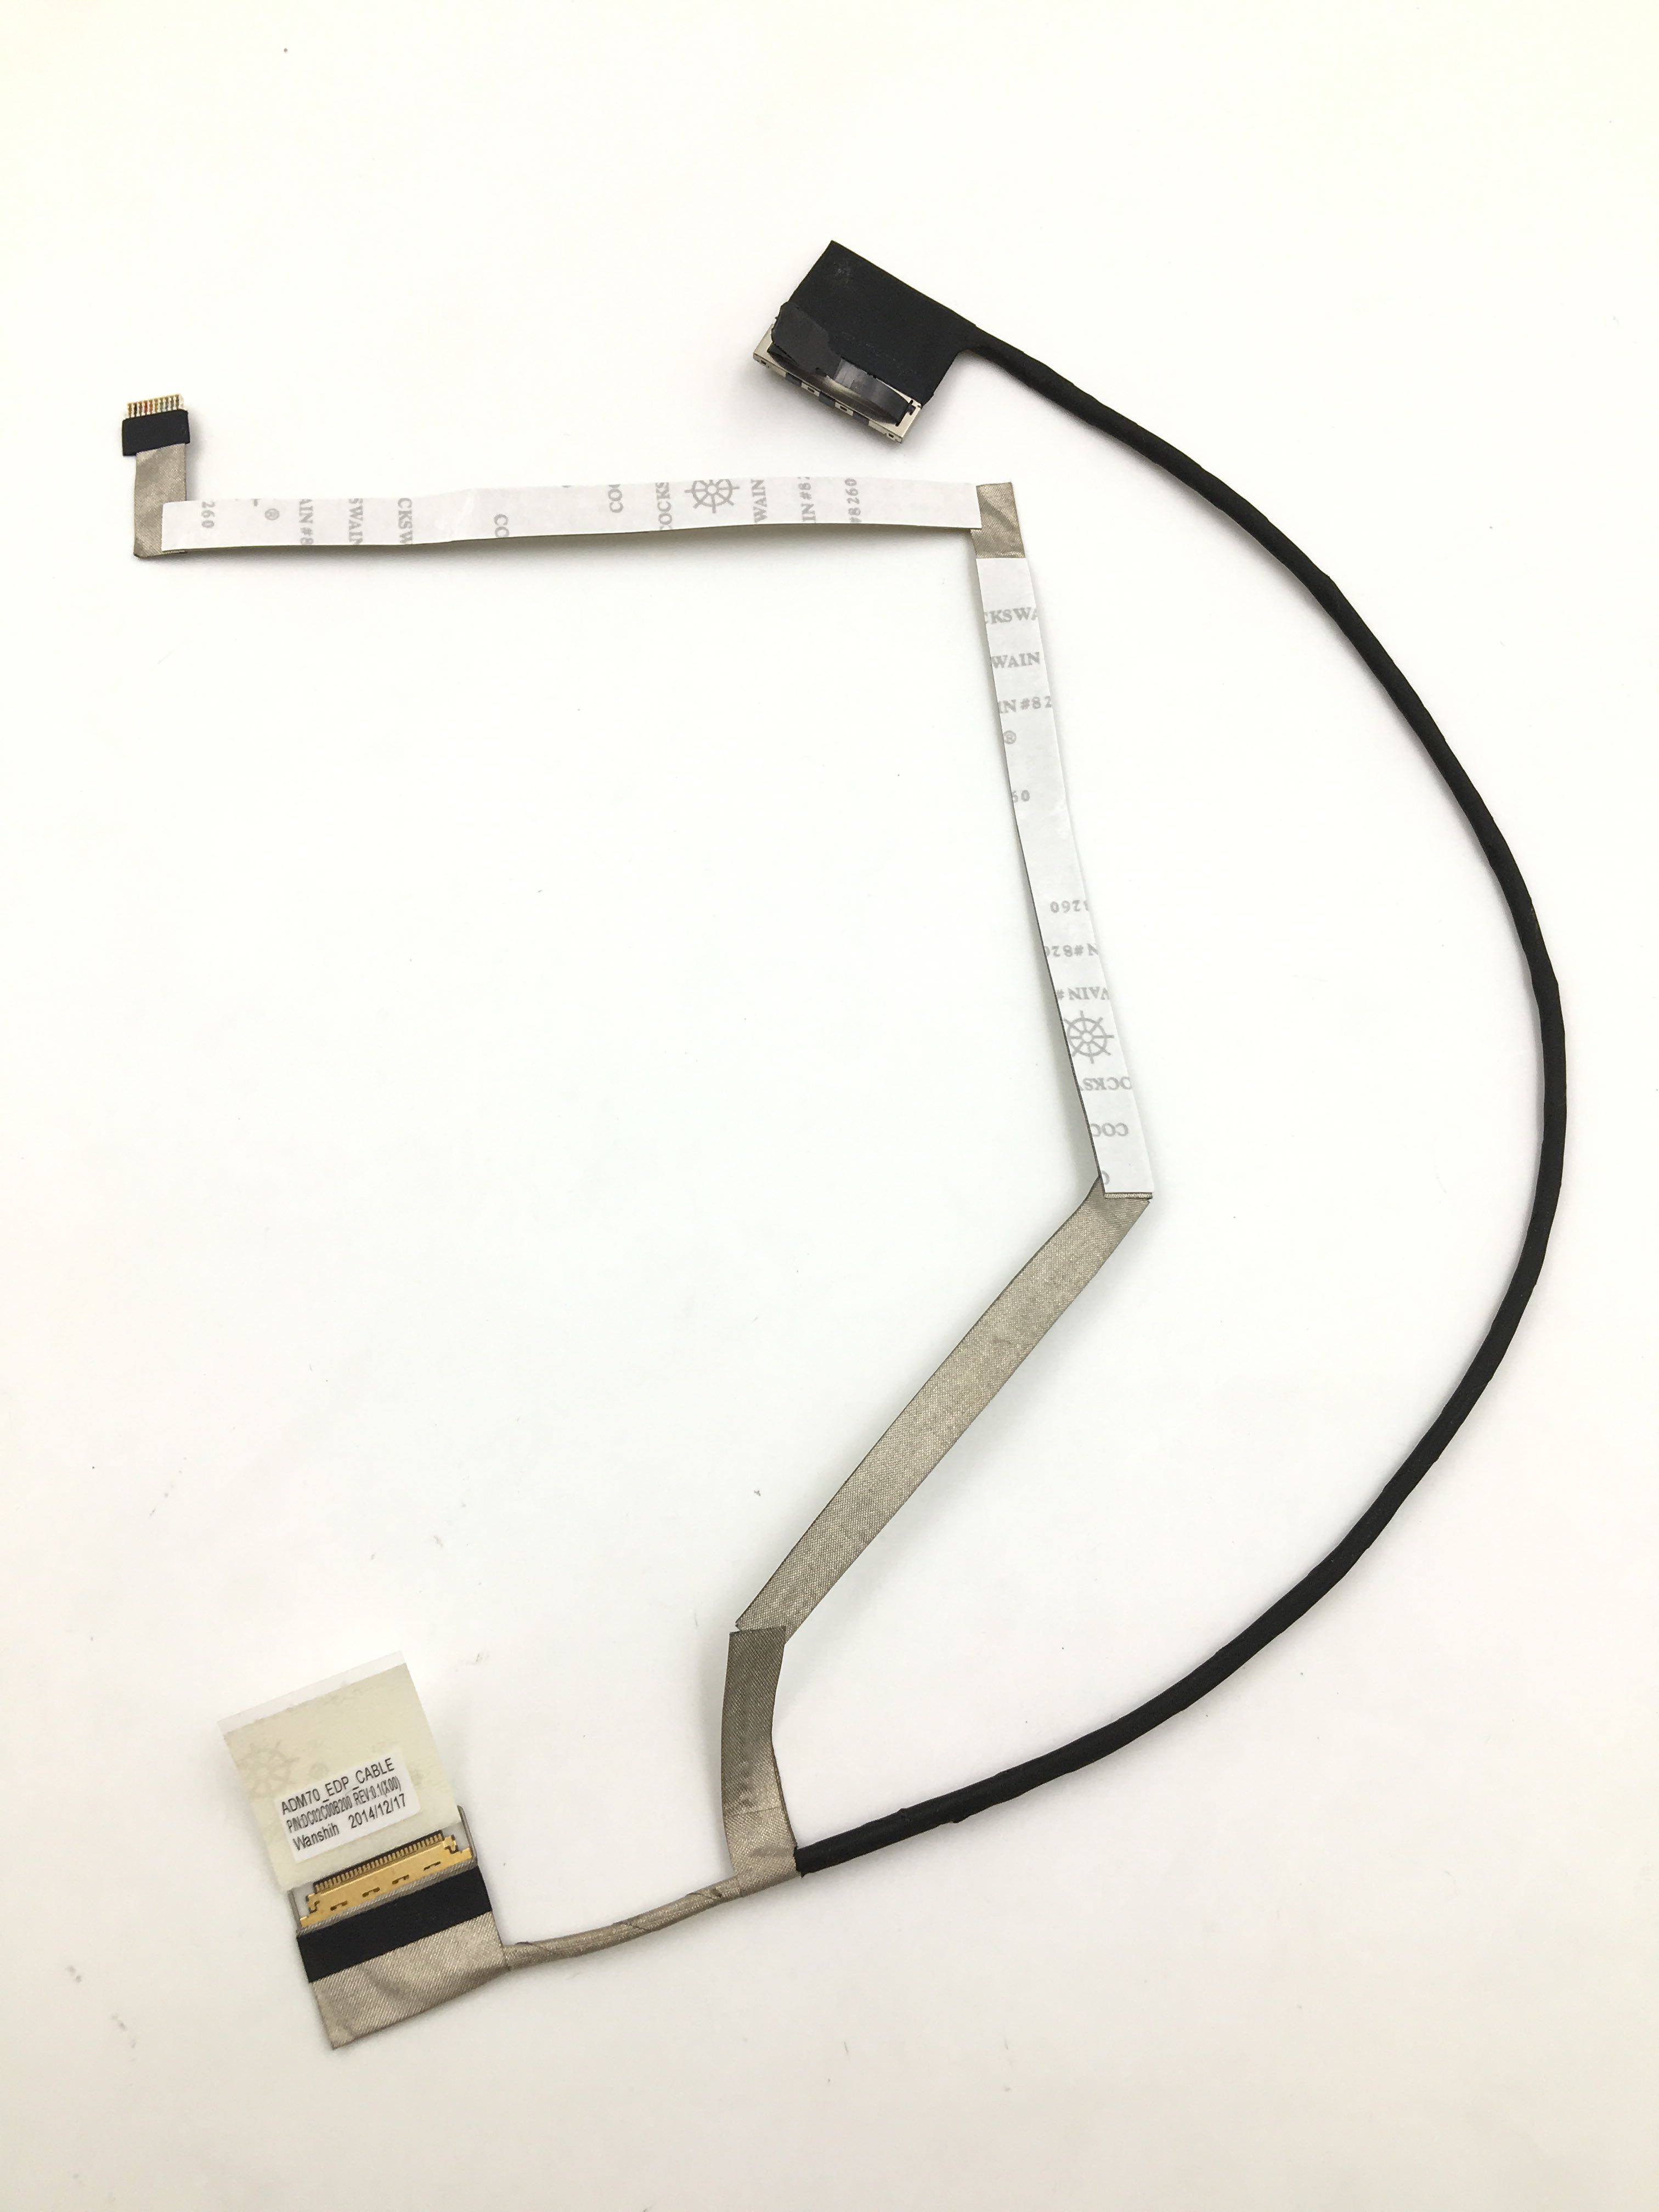 New Dell Latitude E5470 DC02C00B200 0TMN3T TMN3T ADM70 EDP LED LCD Screen LVDS VIDEO Display Cable